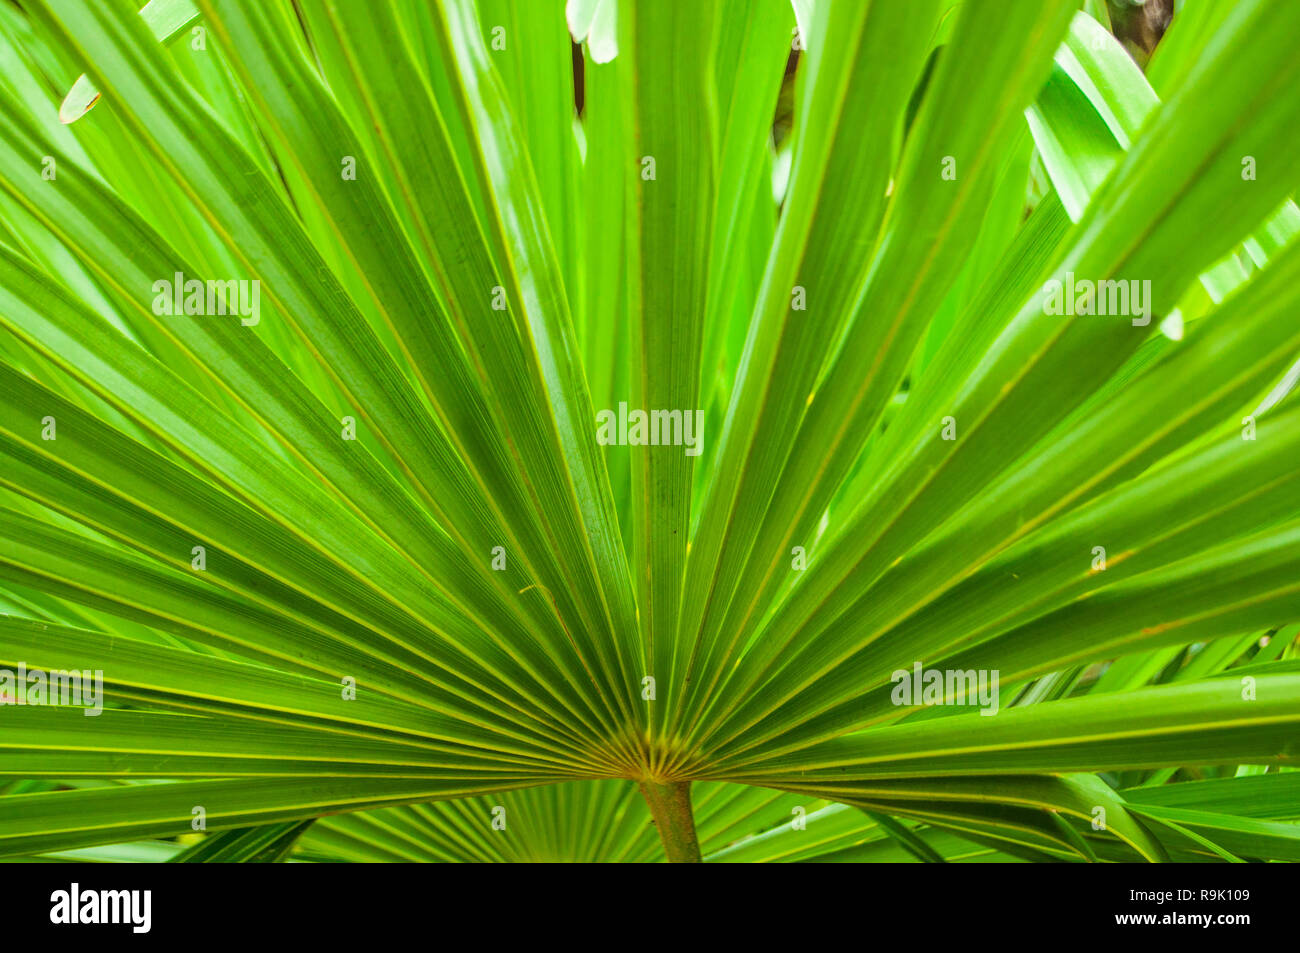 Floral texture made of tropical light green palm leaves. Stock Photo